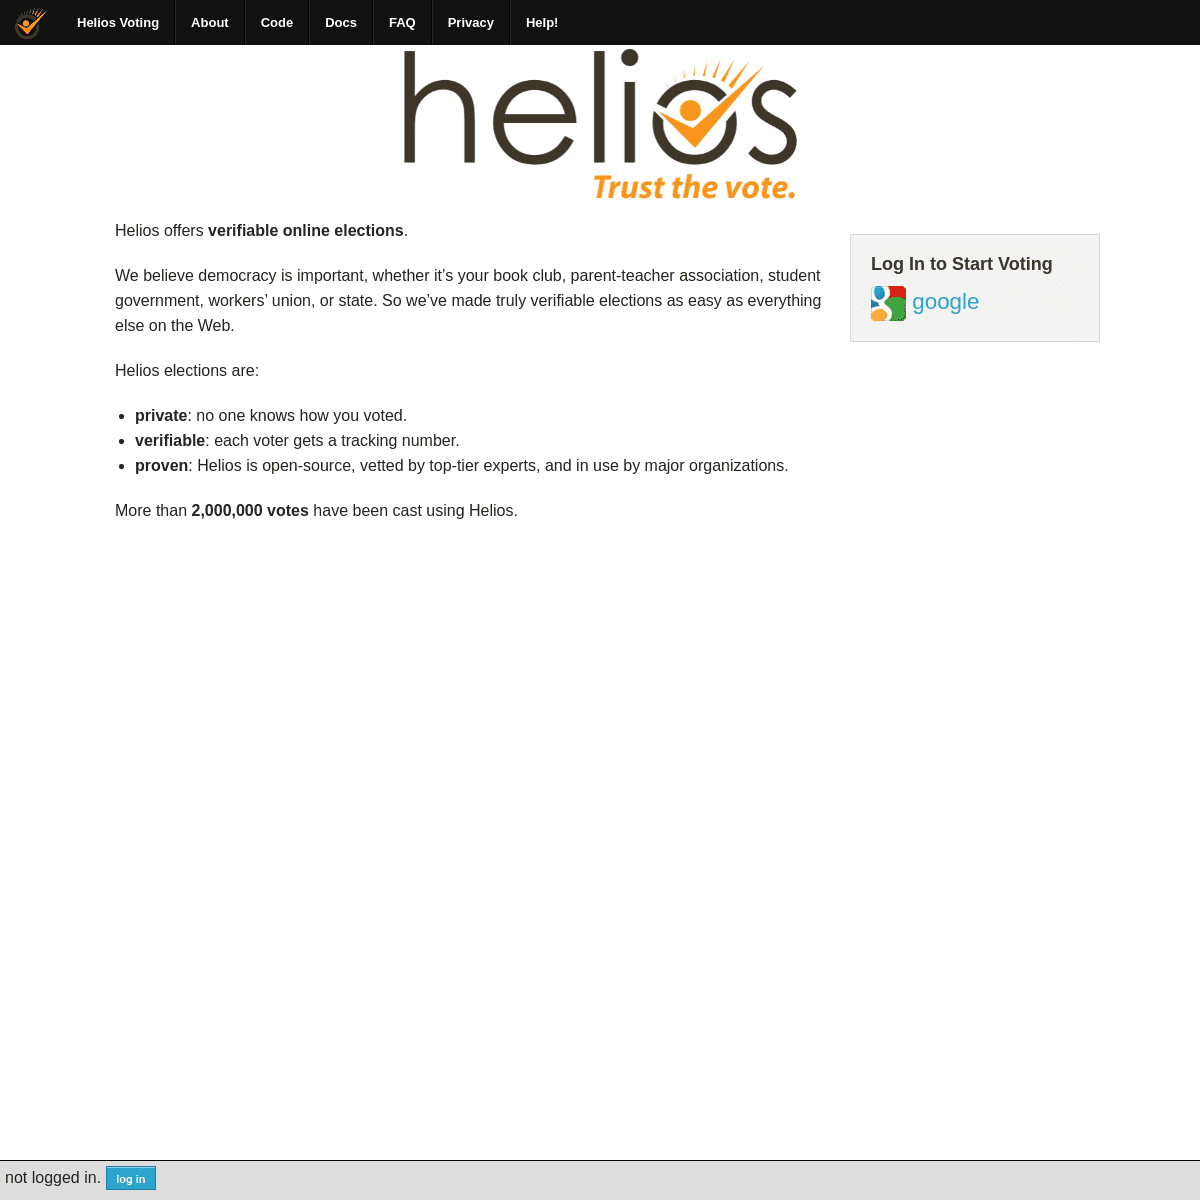 A complete backup of https://heliosvoting.org